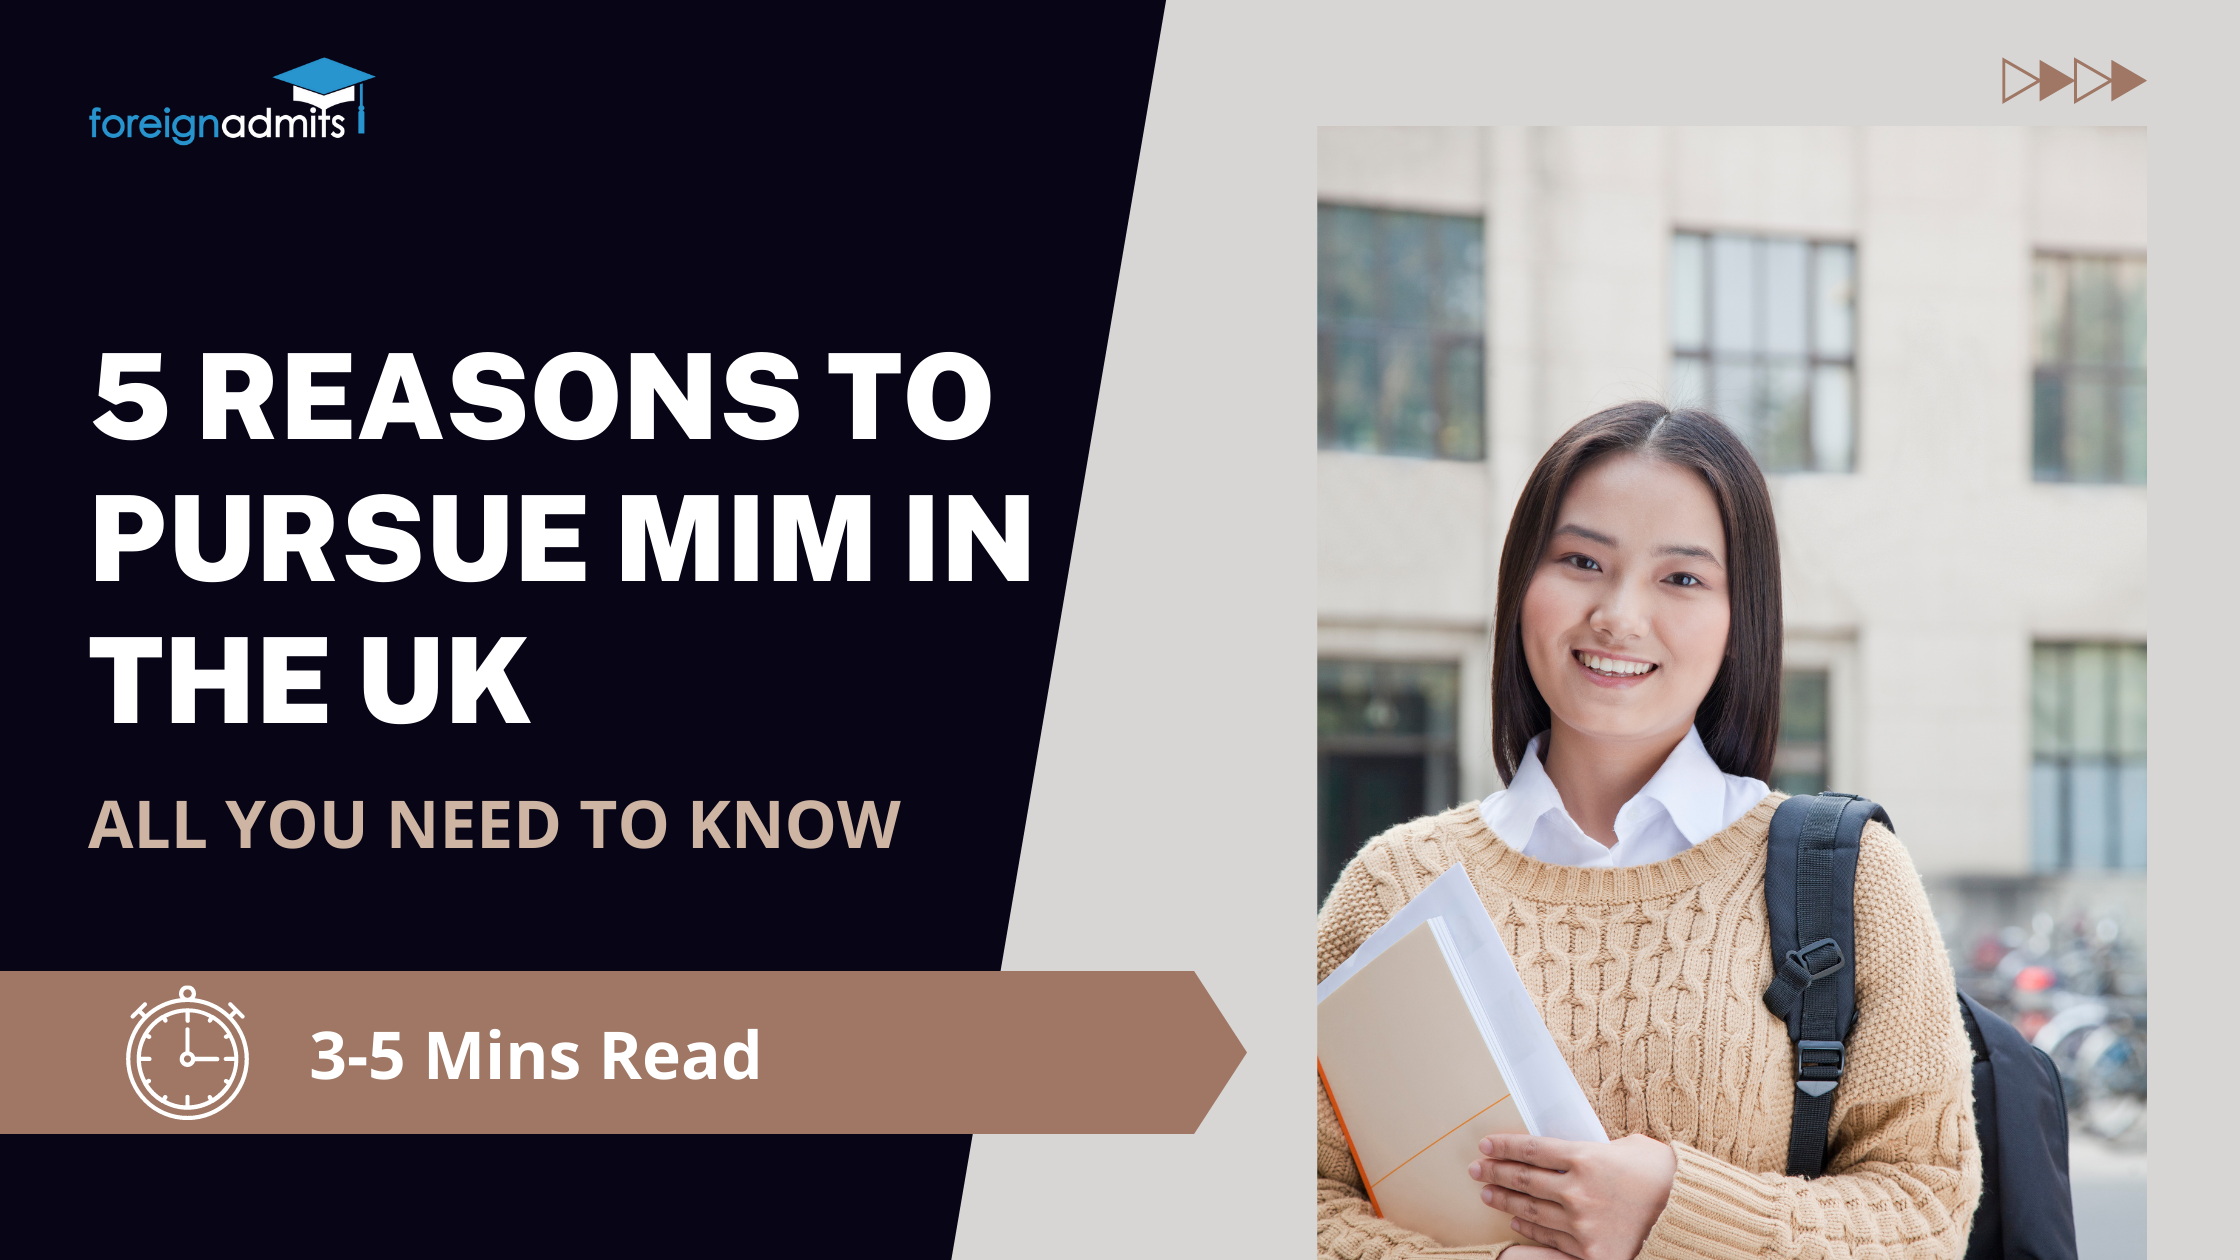 5 Reasons to pursue MIM in the UK